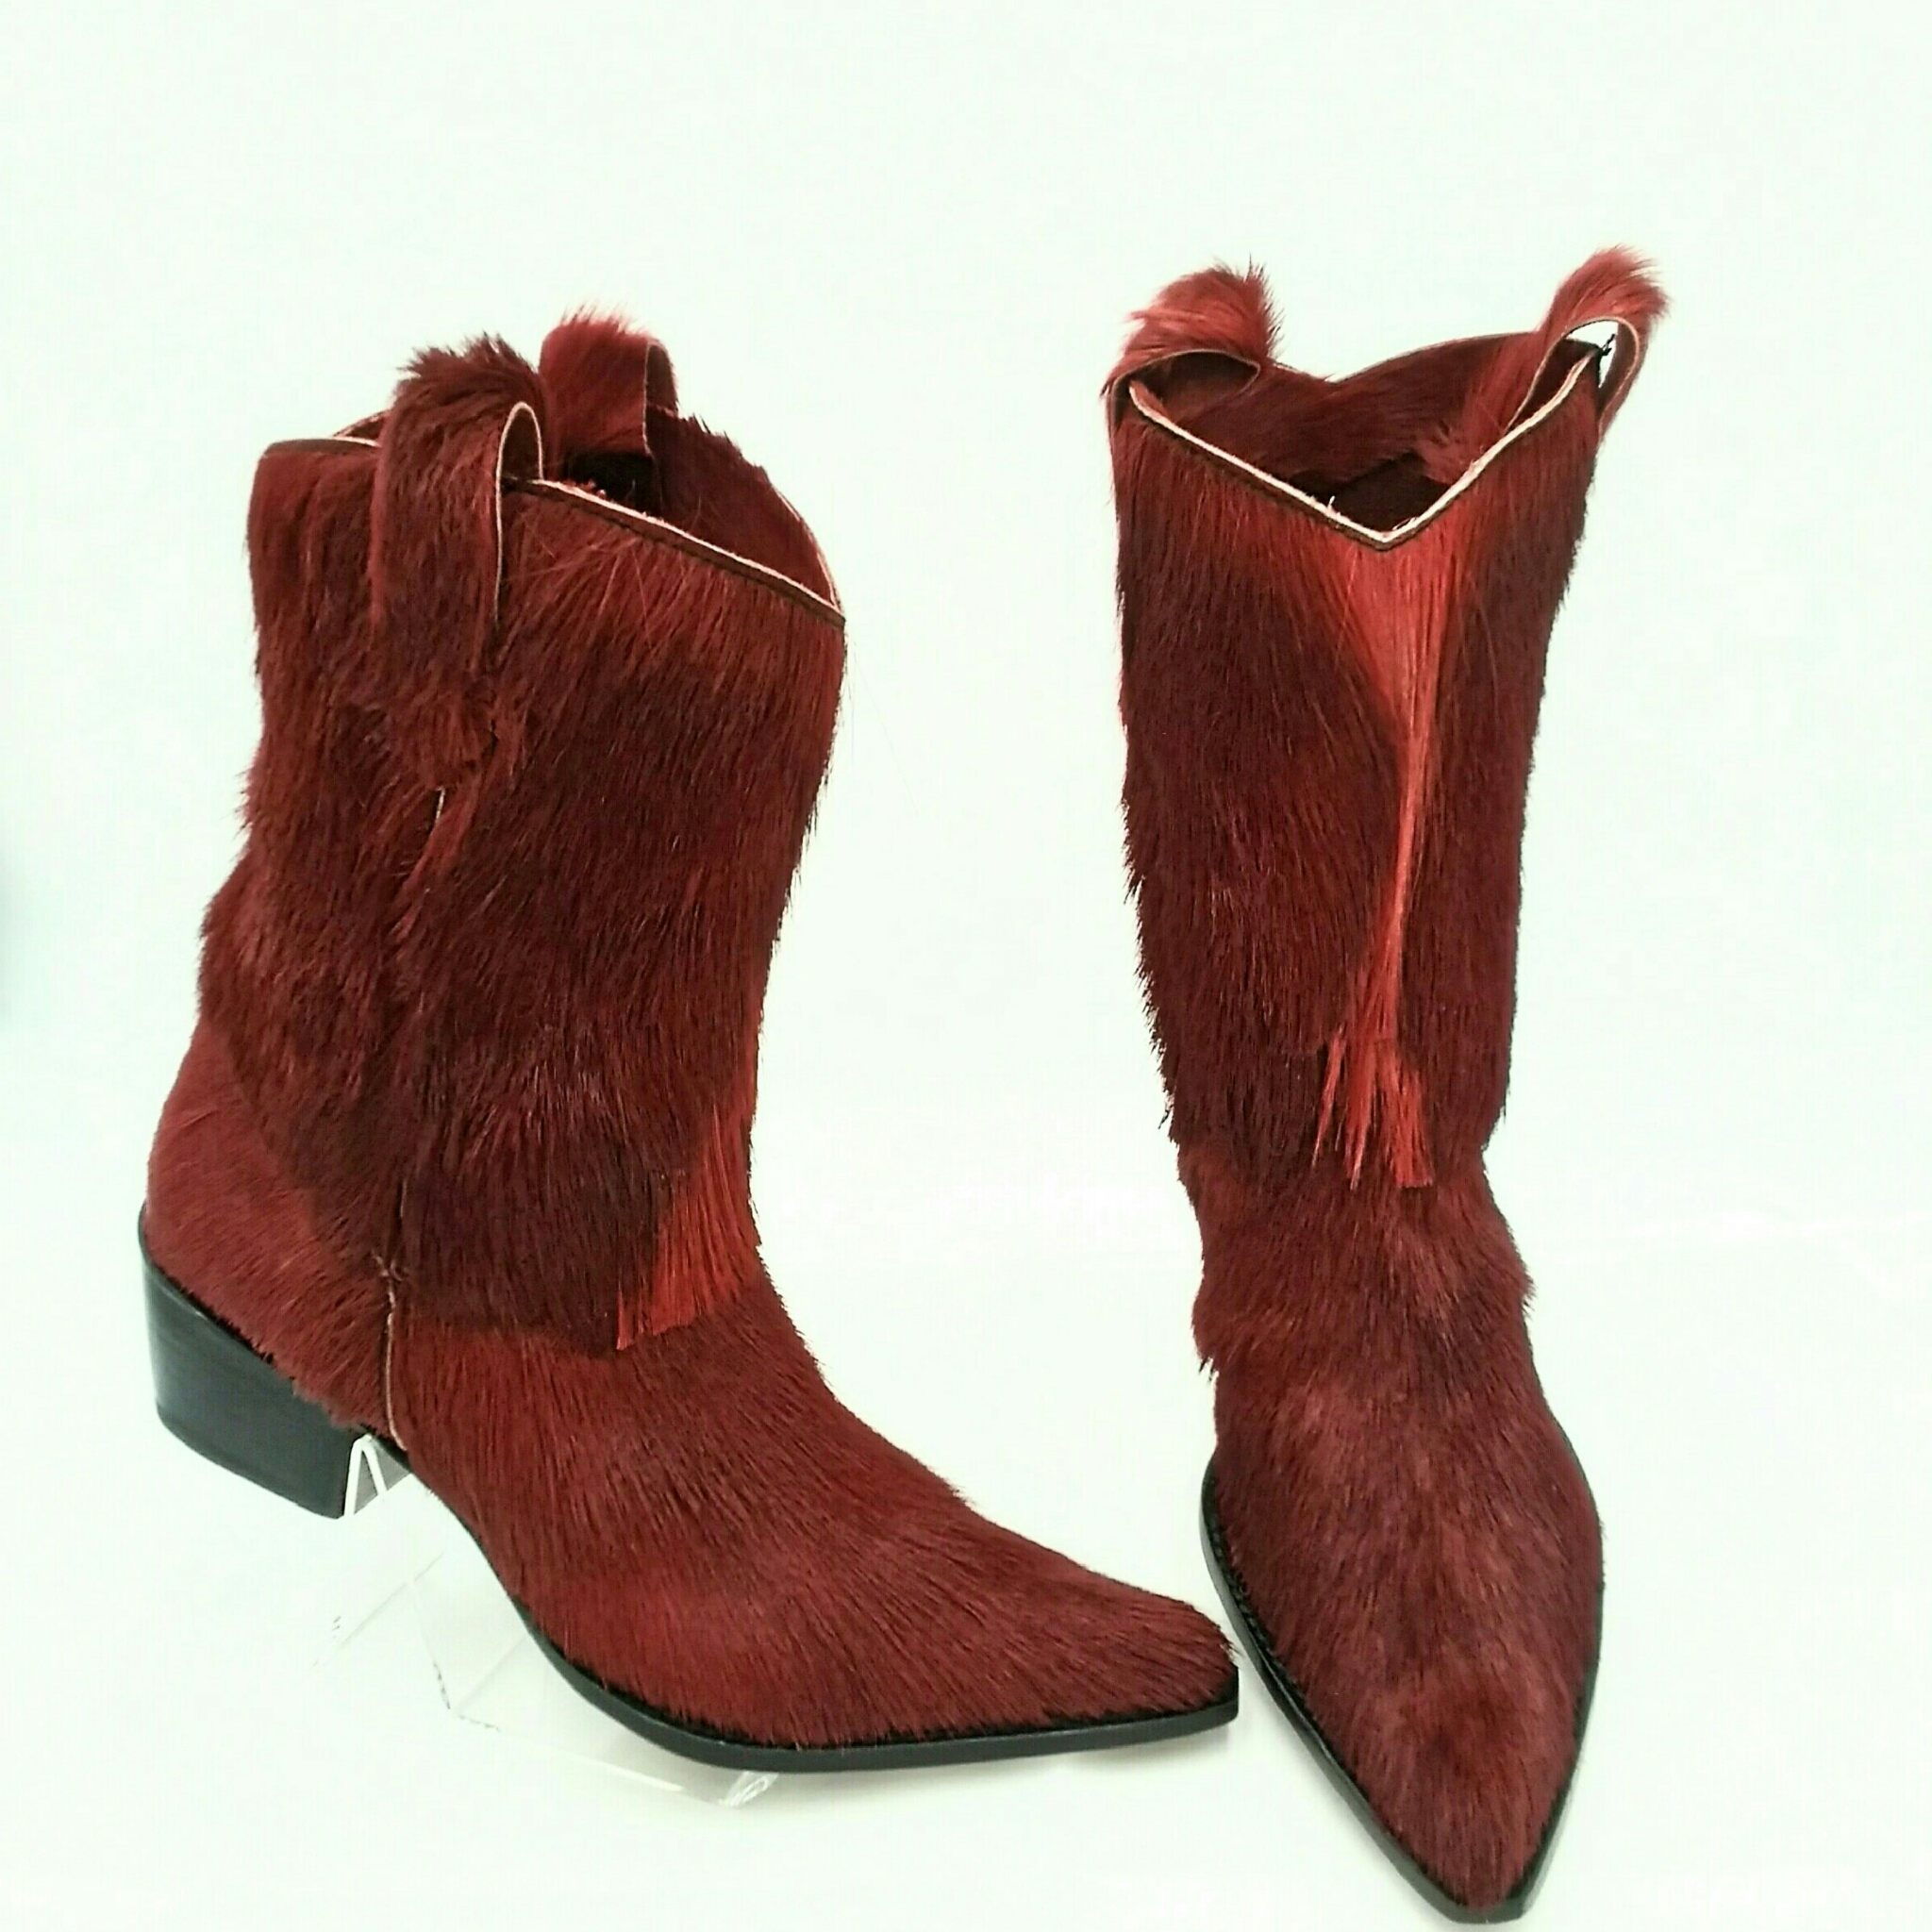 OVEST Italian Handcrafted Red Fur/Hair Cowboy Boots Size 40